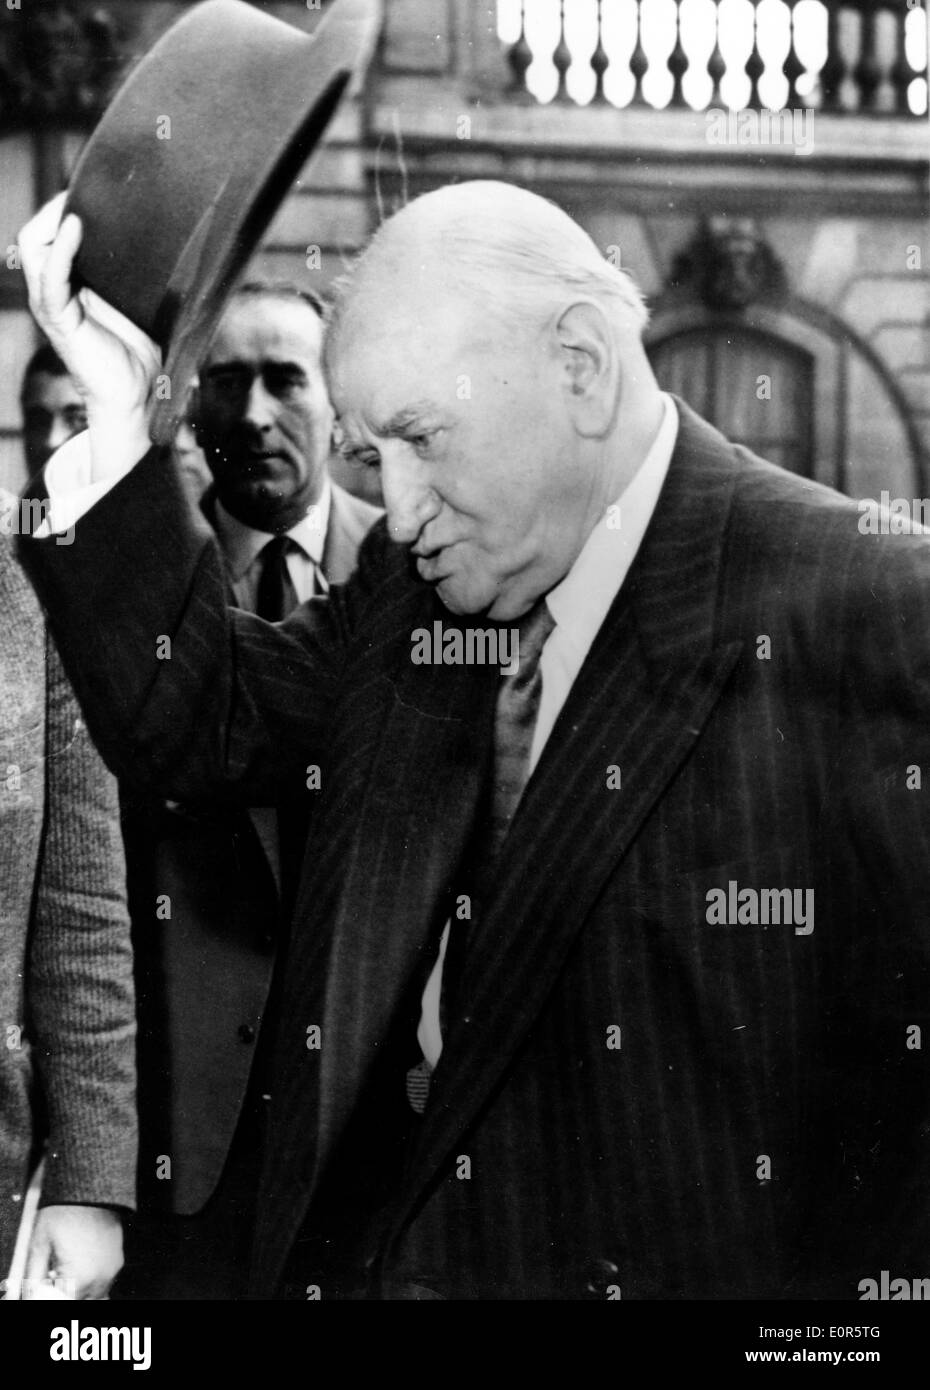 May 30, 1958 - Paris, France - (File Photo) EDOUARD DALADIER was a French Radical-Socialist politician, and Prime Minister of France at the start of the Second World War. PICTURED: EDOUARD DALADIER leaving Elysee Palace after talks with French President Rene Coty. Stock Photo